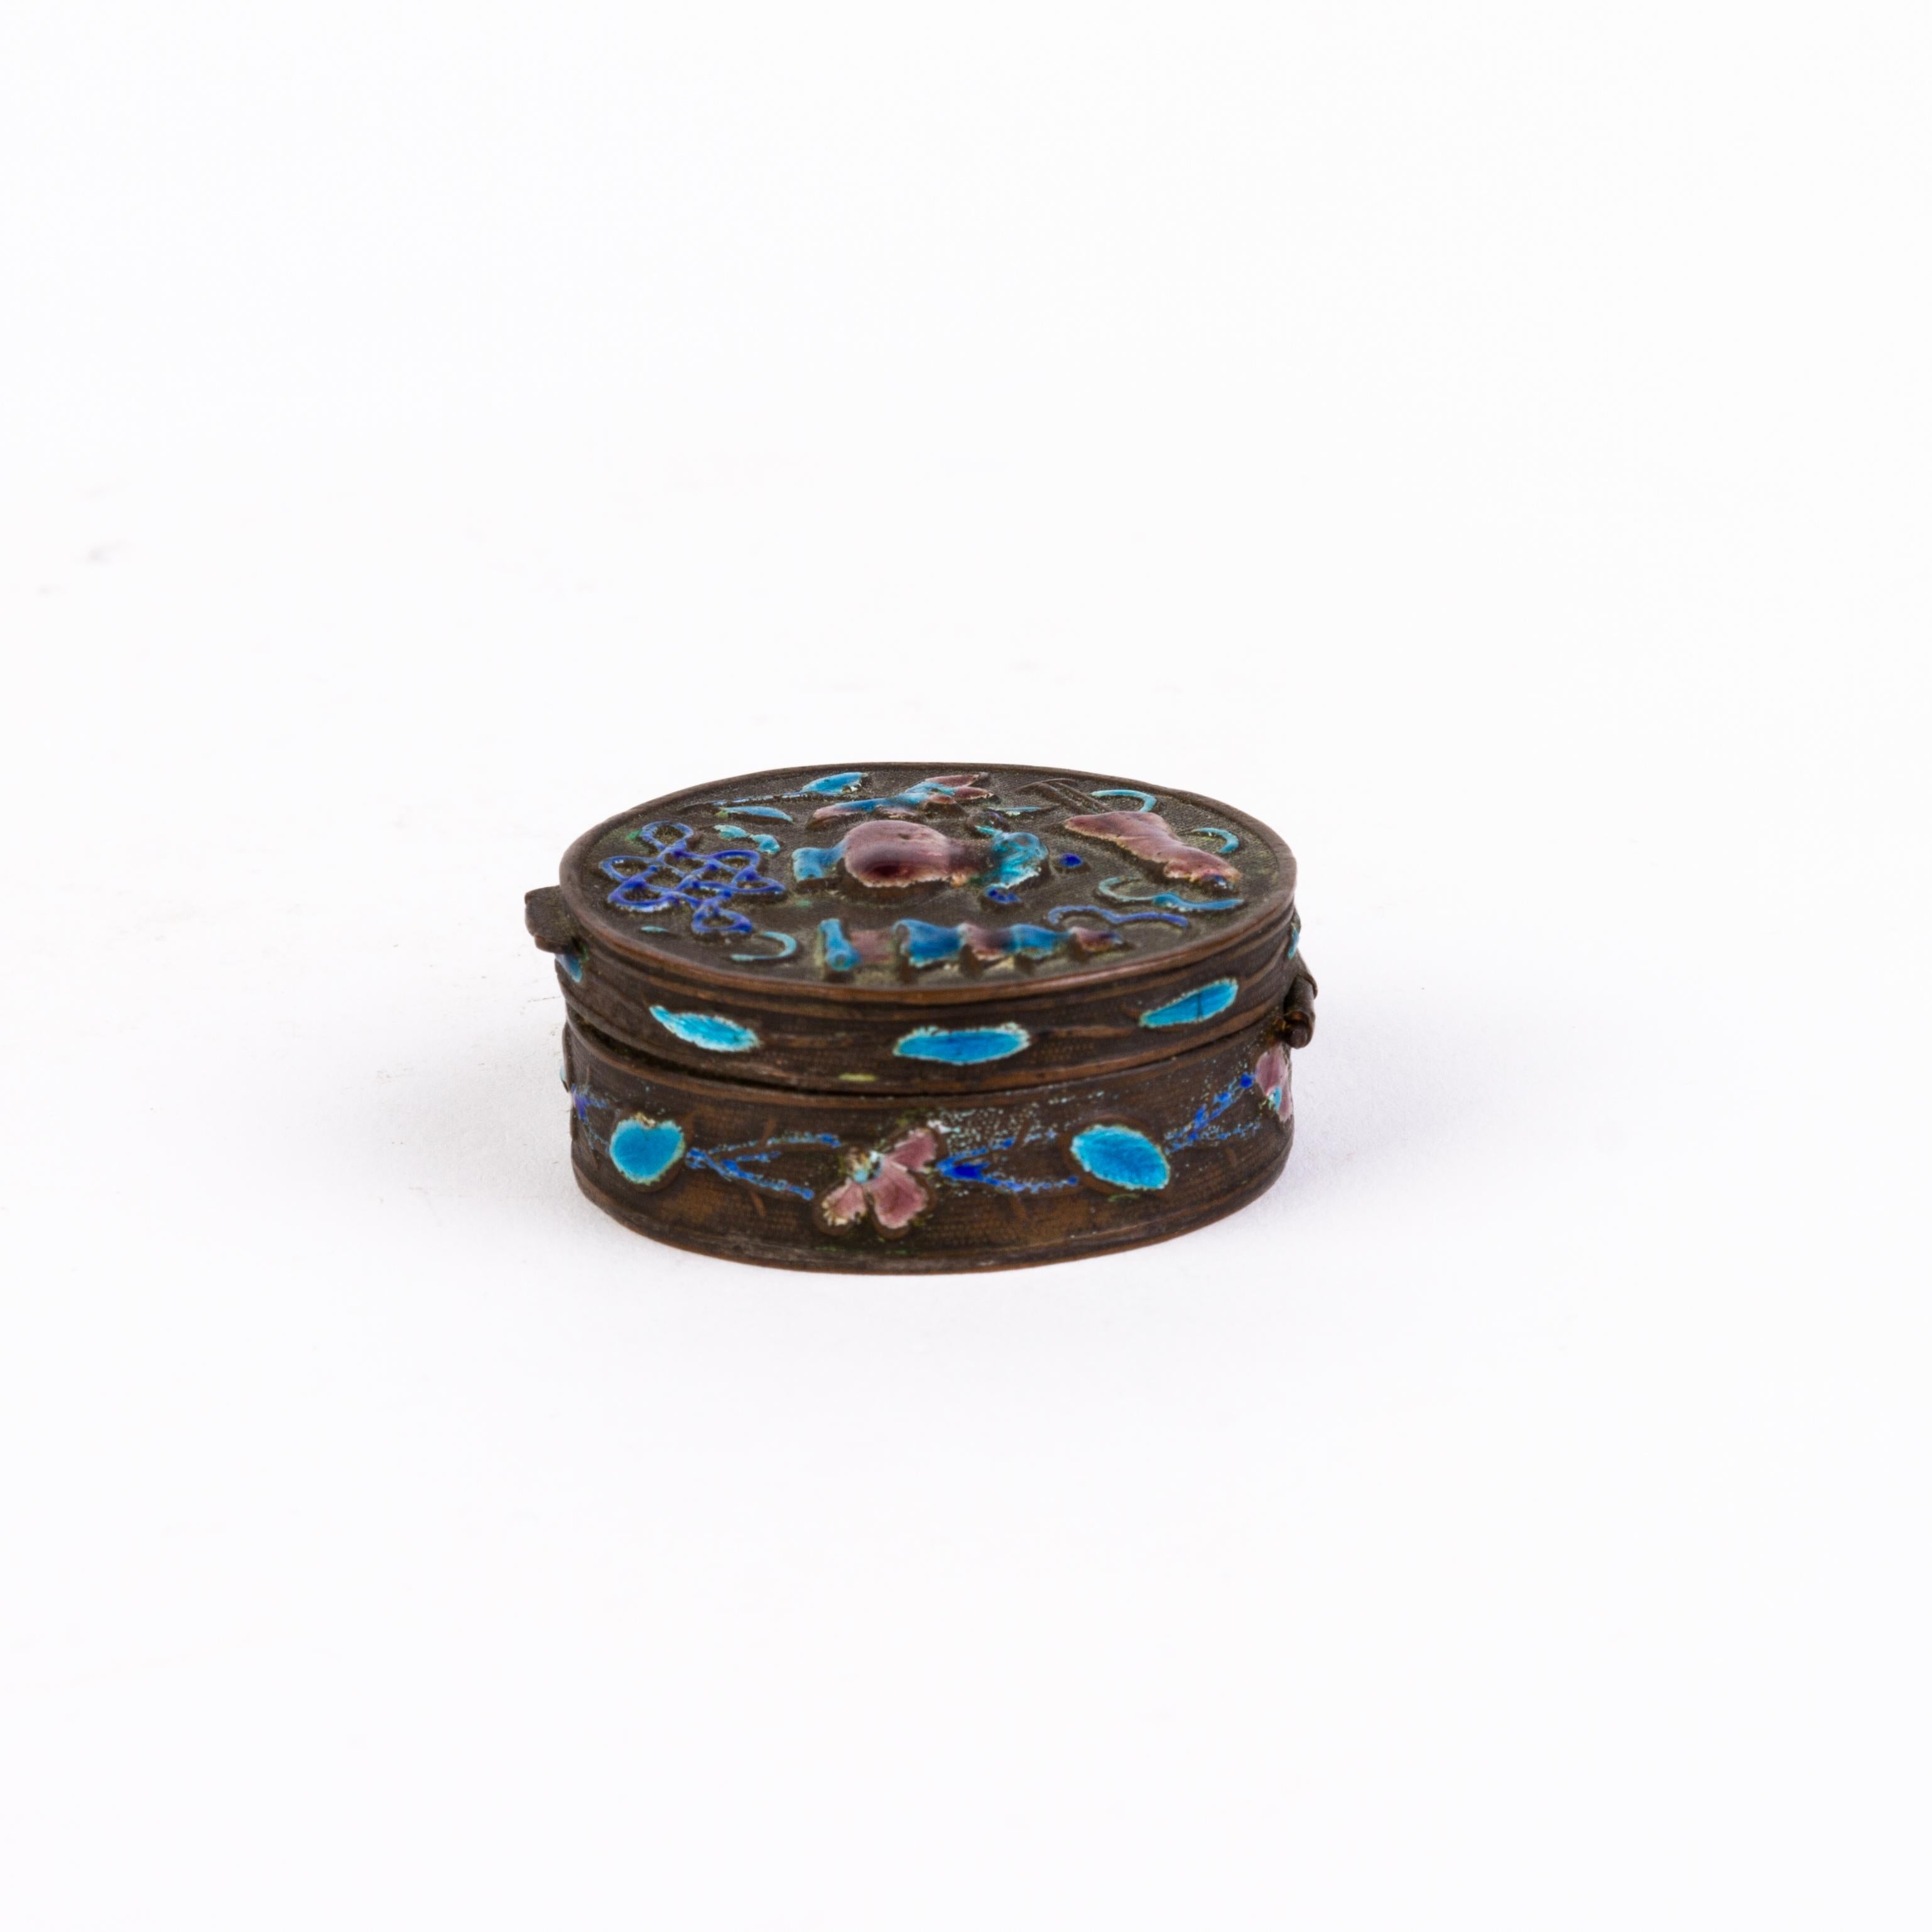 Chinese Enamel Cloisonne Snuff Trinket Box 19th Century In Good Condition For Sale In Nottingham, GB